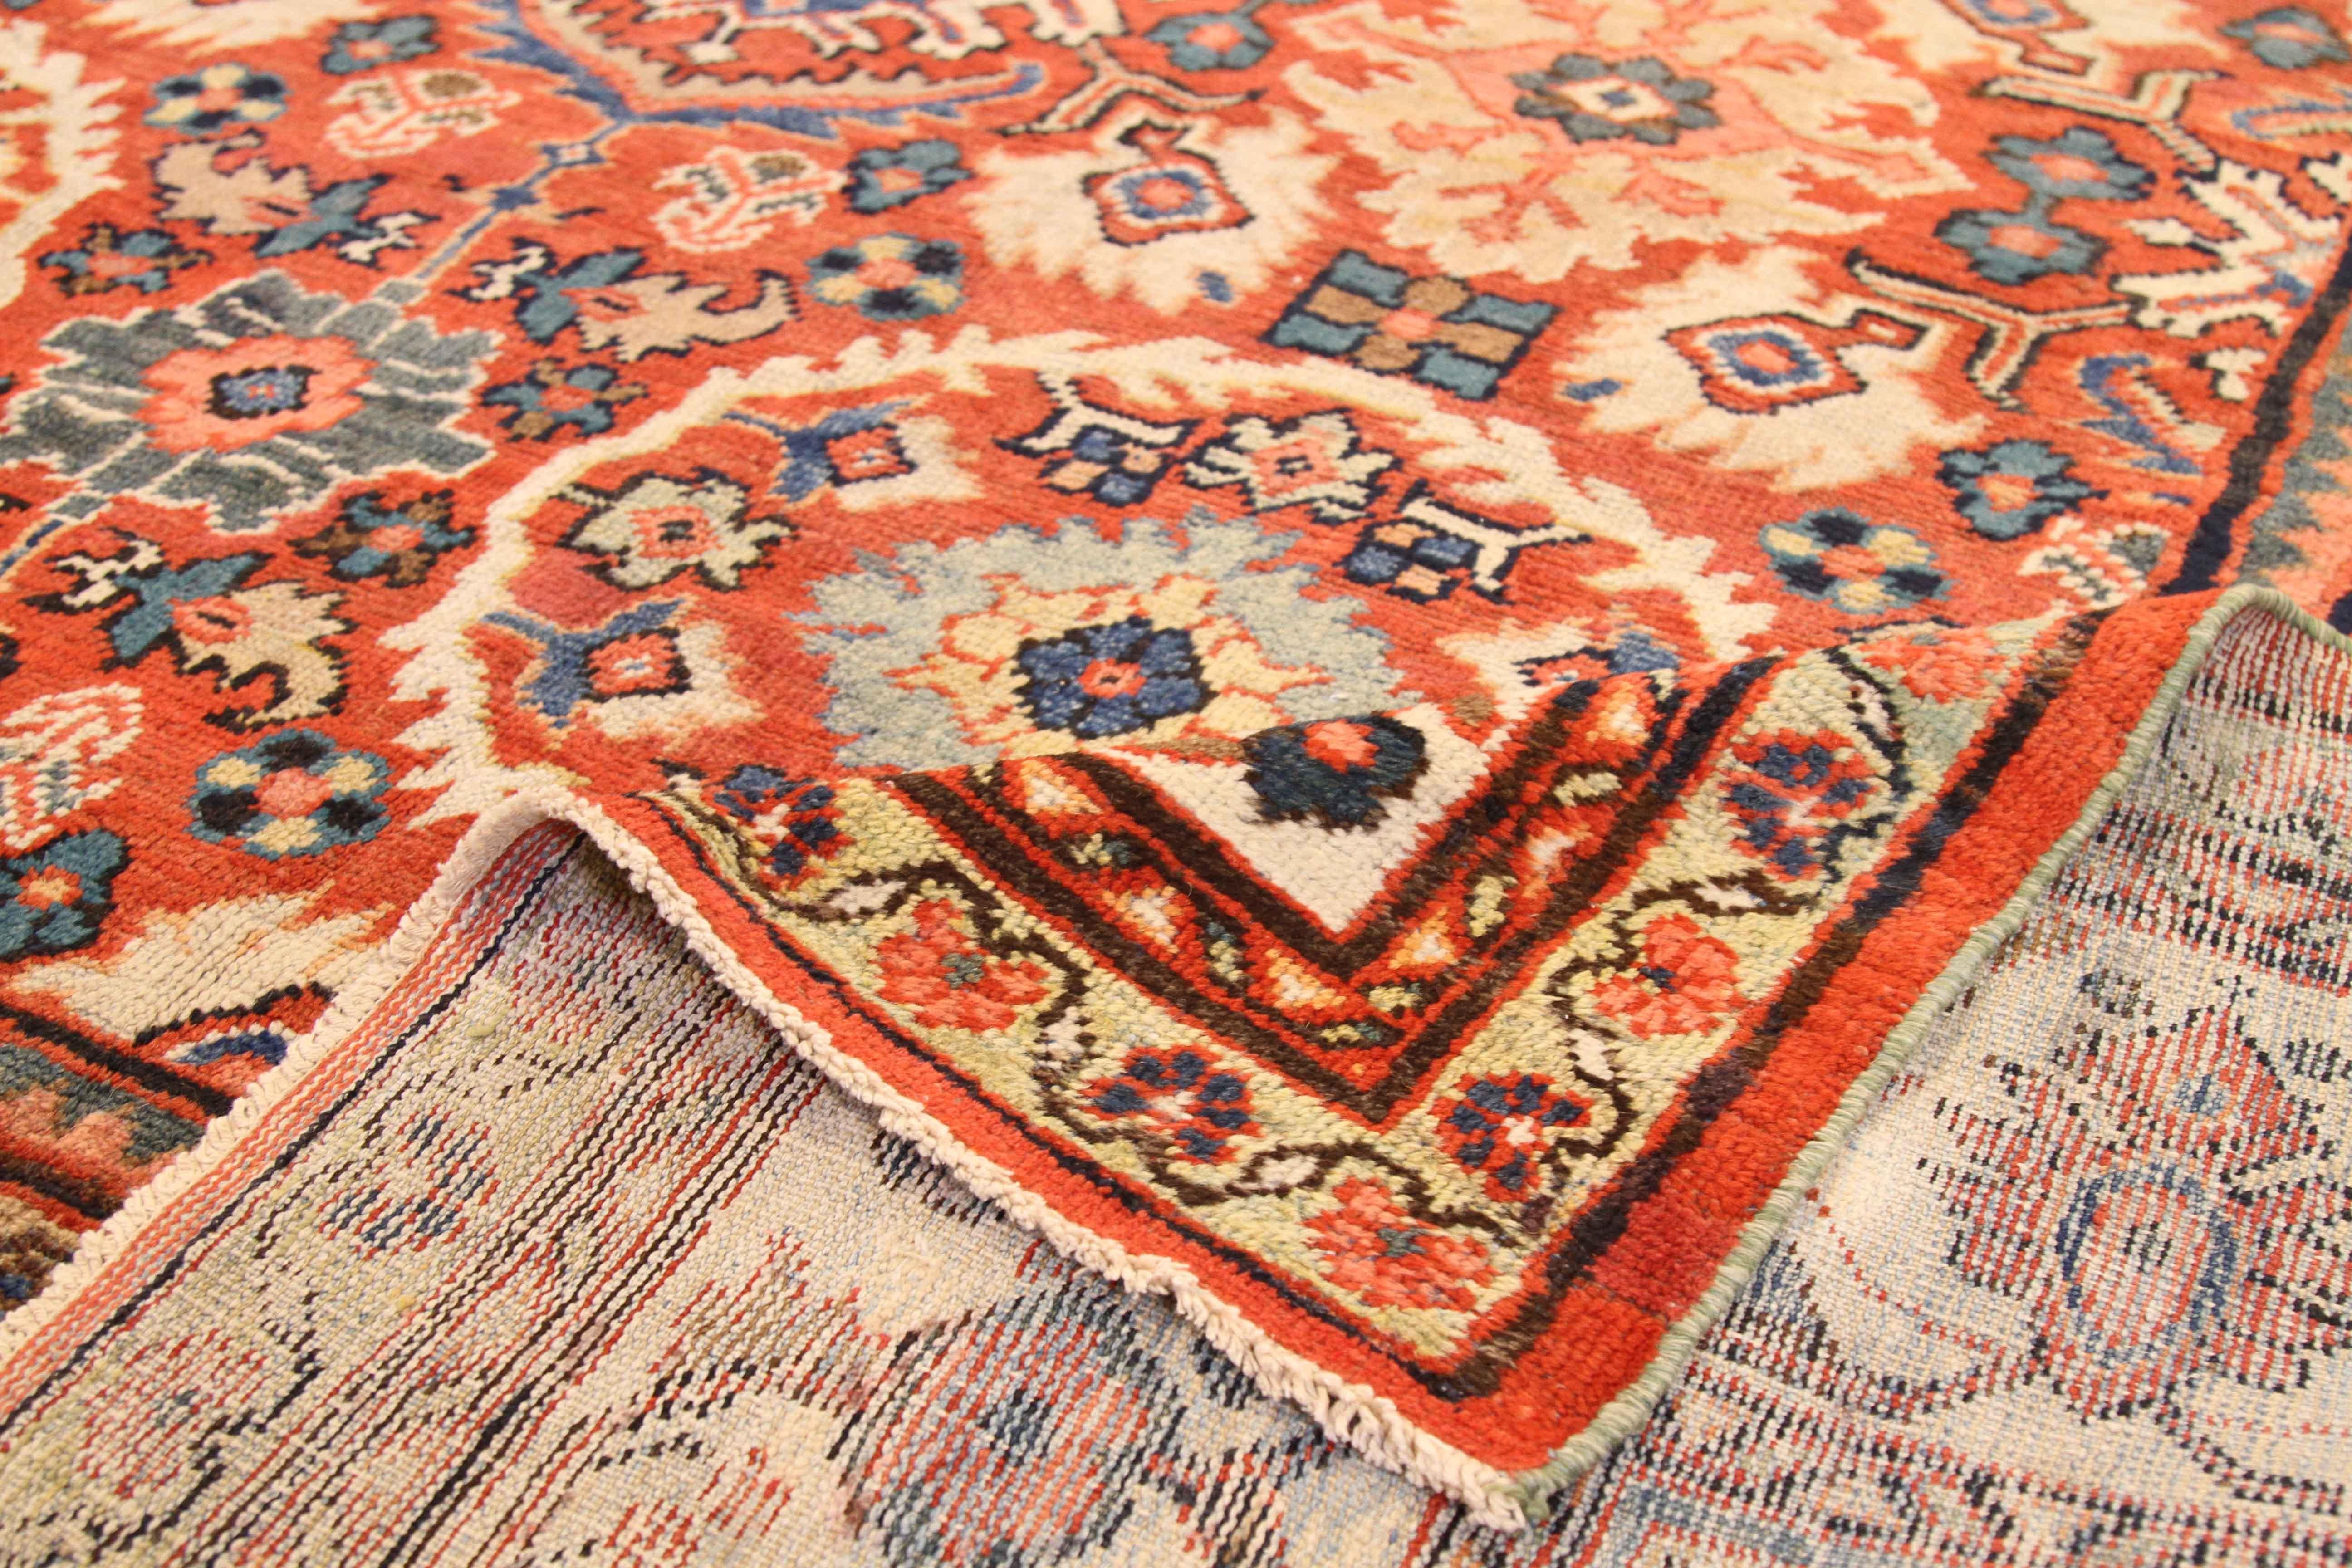 Antique Persian rug hand knotted in the 1930s using the highest quality of wool and plant-based dyes. It showcases a series of oval shaped floral details that are typical of the Sultanabad rug design. For its color, weavers matched cozy ivory with